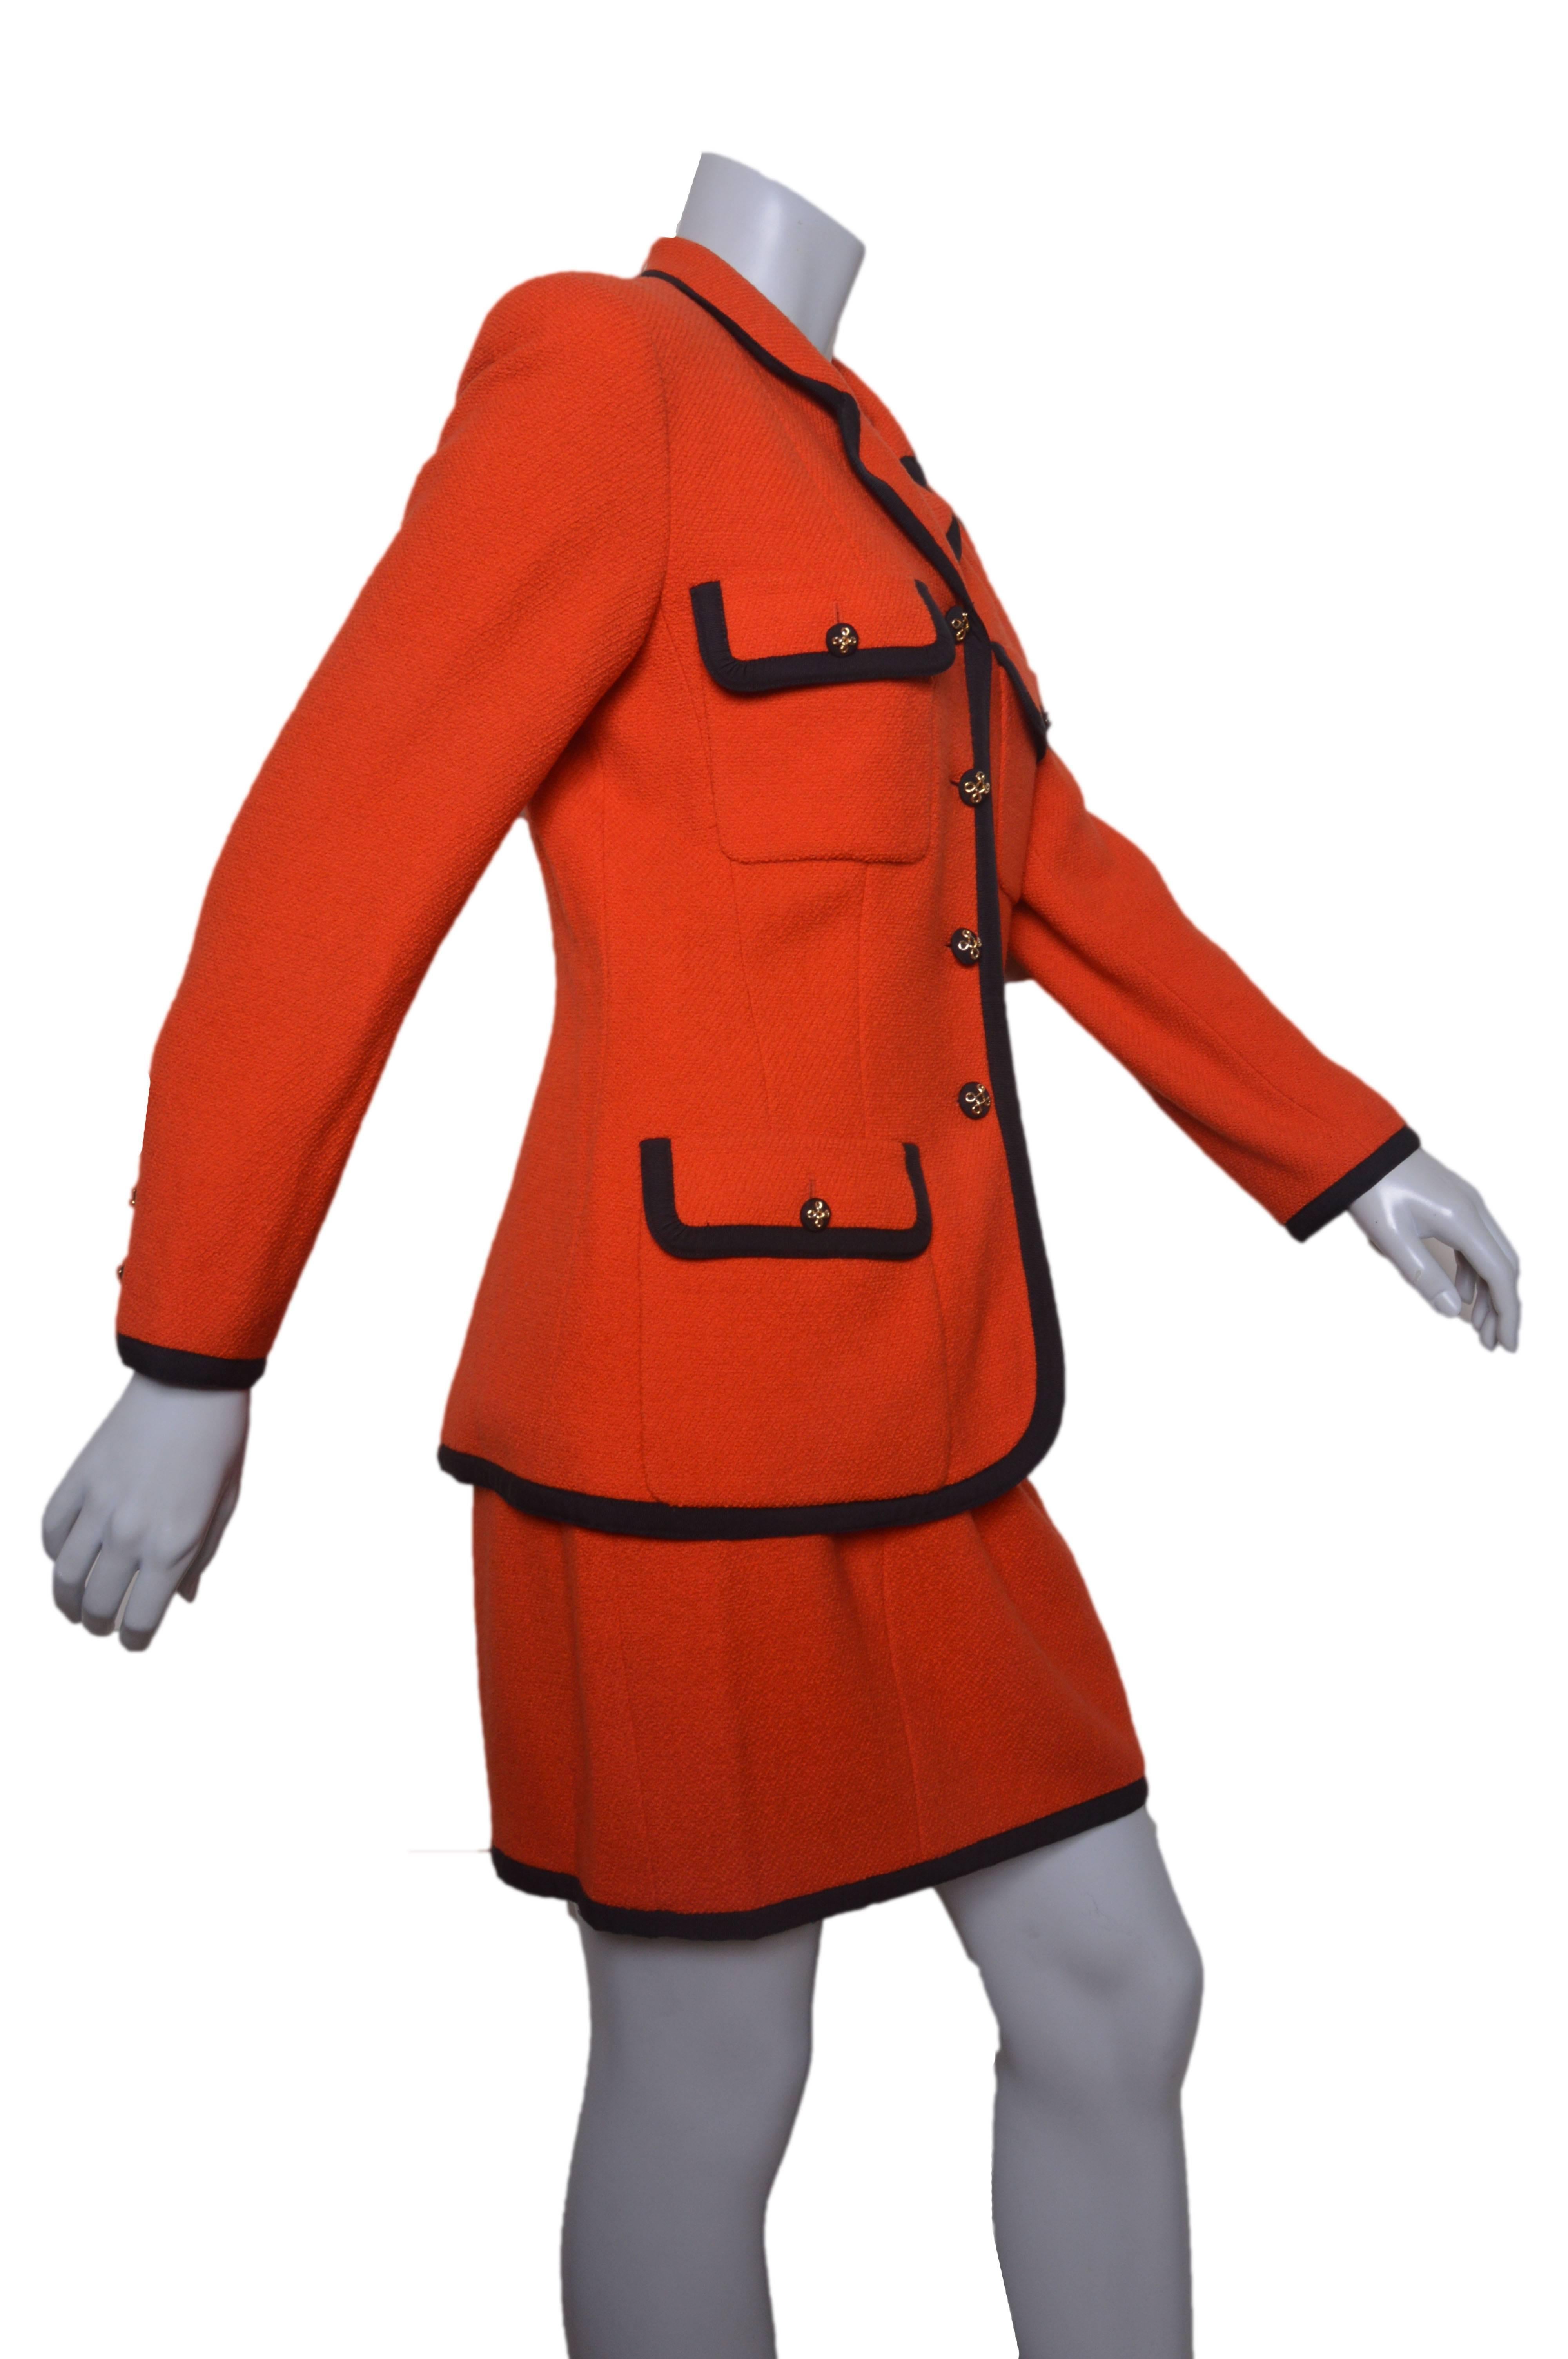 Vintage bright orange Chanel Boutique suit.
Orange wool black with black ribbon trim.
Iconic details on jacket.
Two chest pockets and two hip flap pockets.
Slightly fitted shape.
Gold buttons throughout and of cuffs.
Skirt is straight with